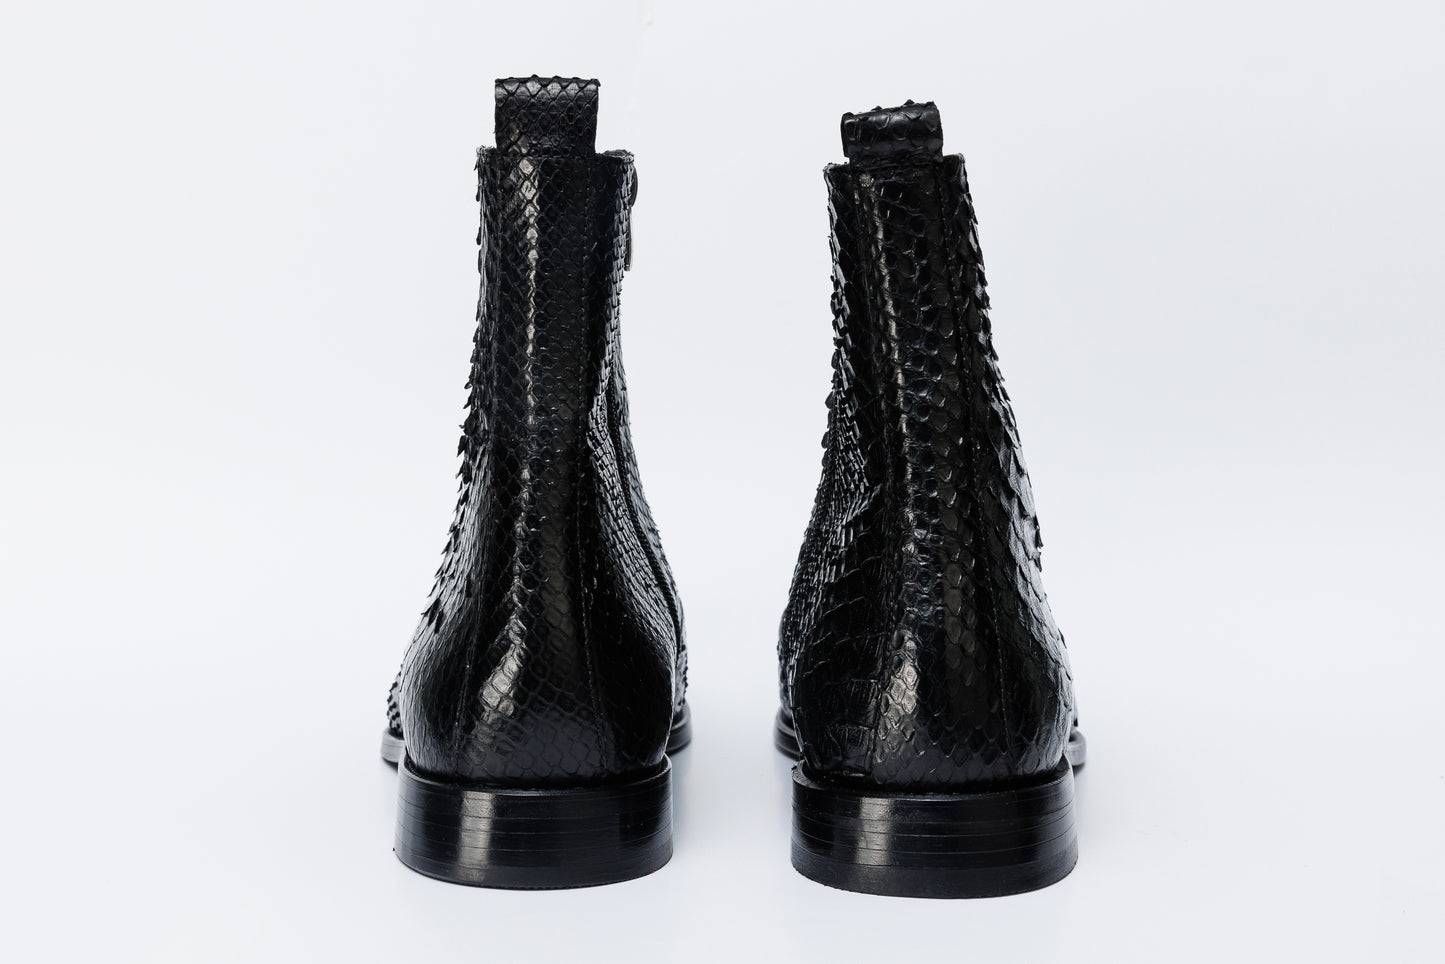 The Boss Black Pythn Snk Zip-Up Leather Men Boot Limited Edition